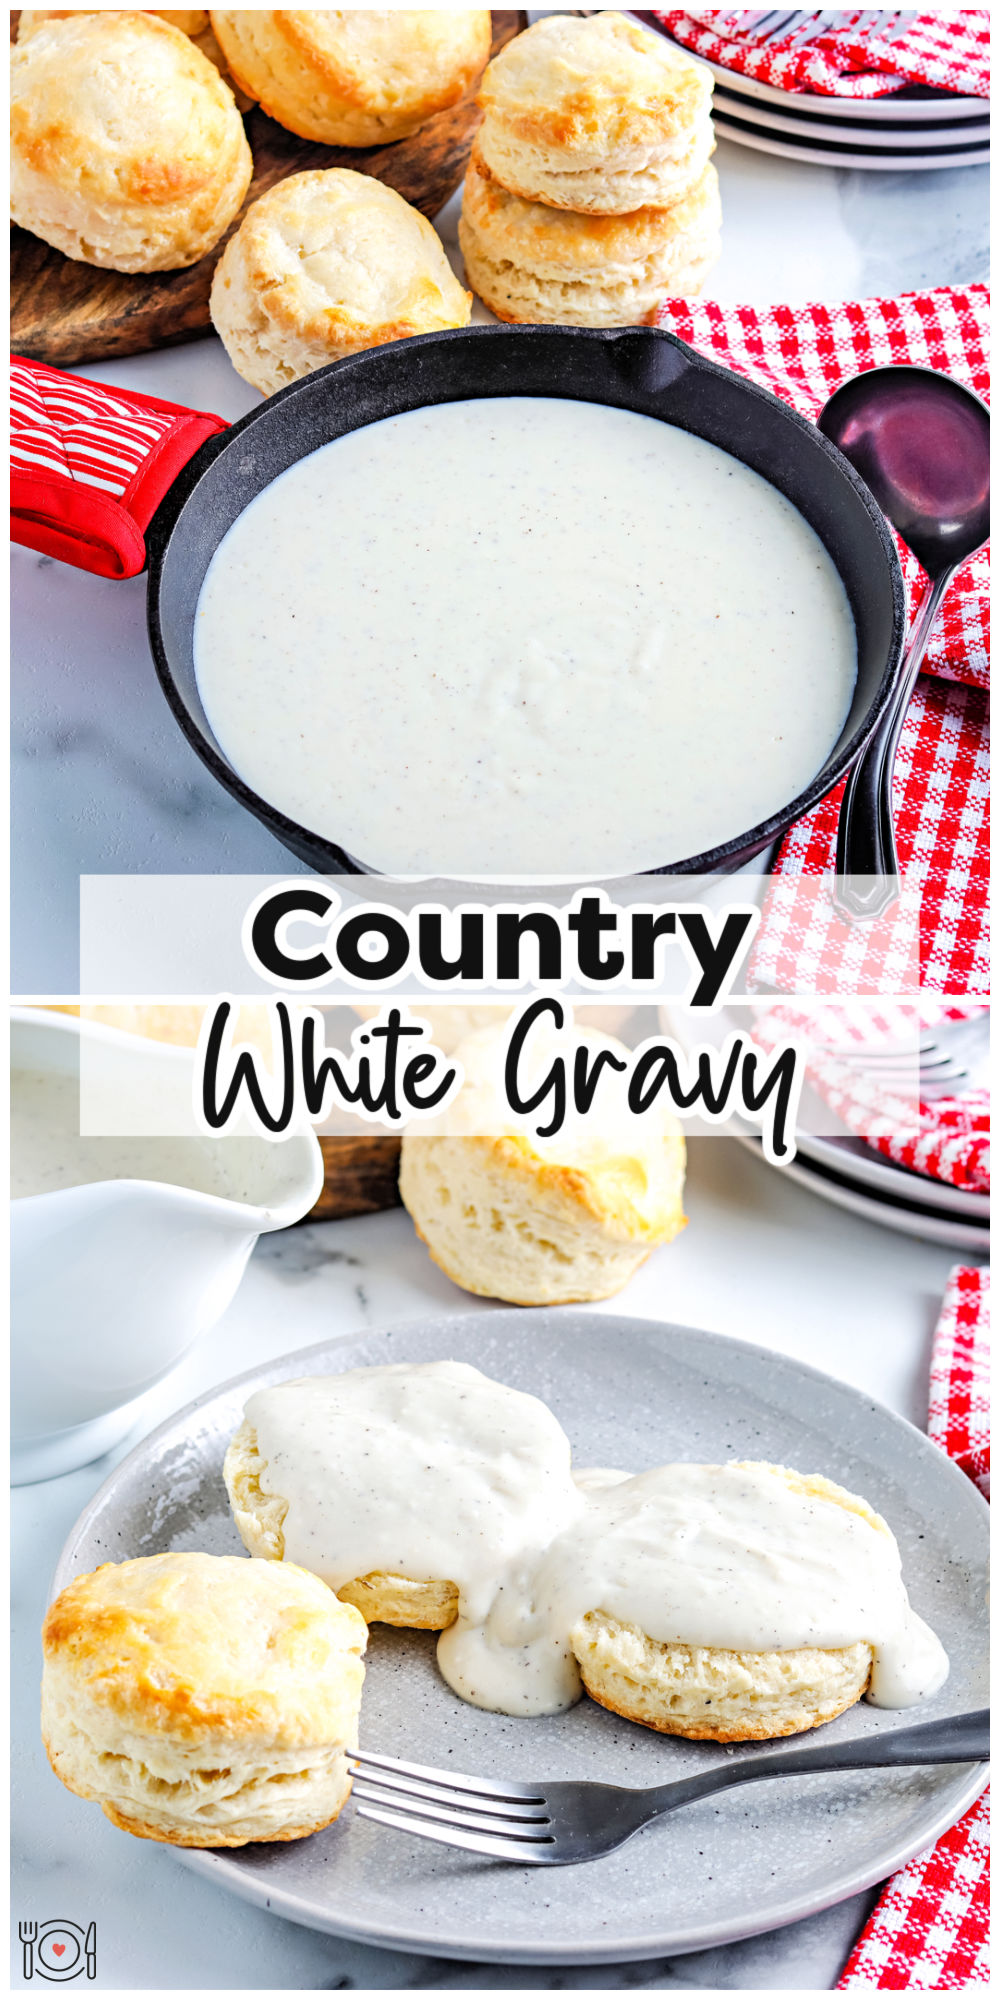 This Country White Gravy recipe is a Southern classic for a reason. It's perfect for pouring over biscuits, chicken fried steak, mashed potatoes, and fried pork chops. via @foodfolksandfun